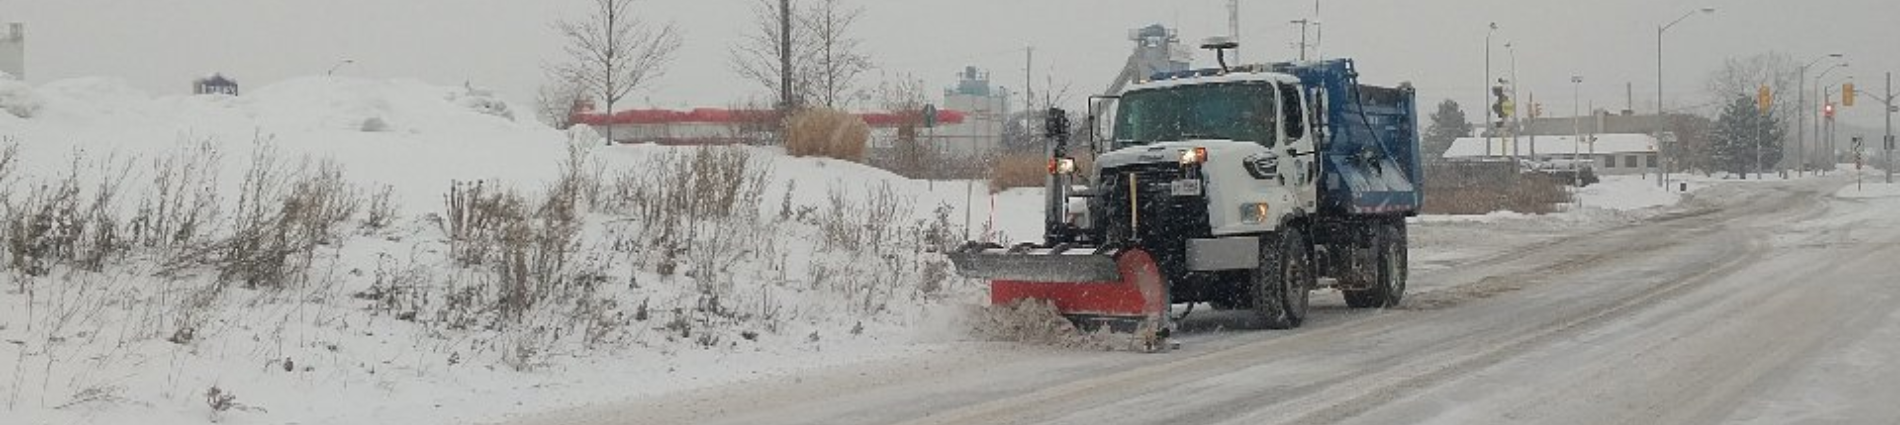 Photo of a snowplow on a snowy road